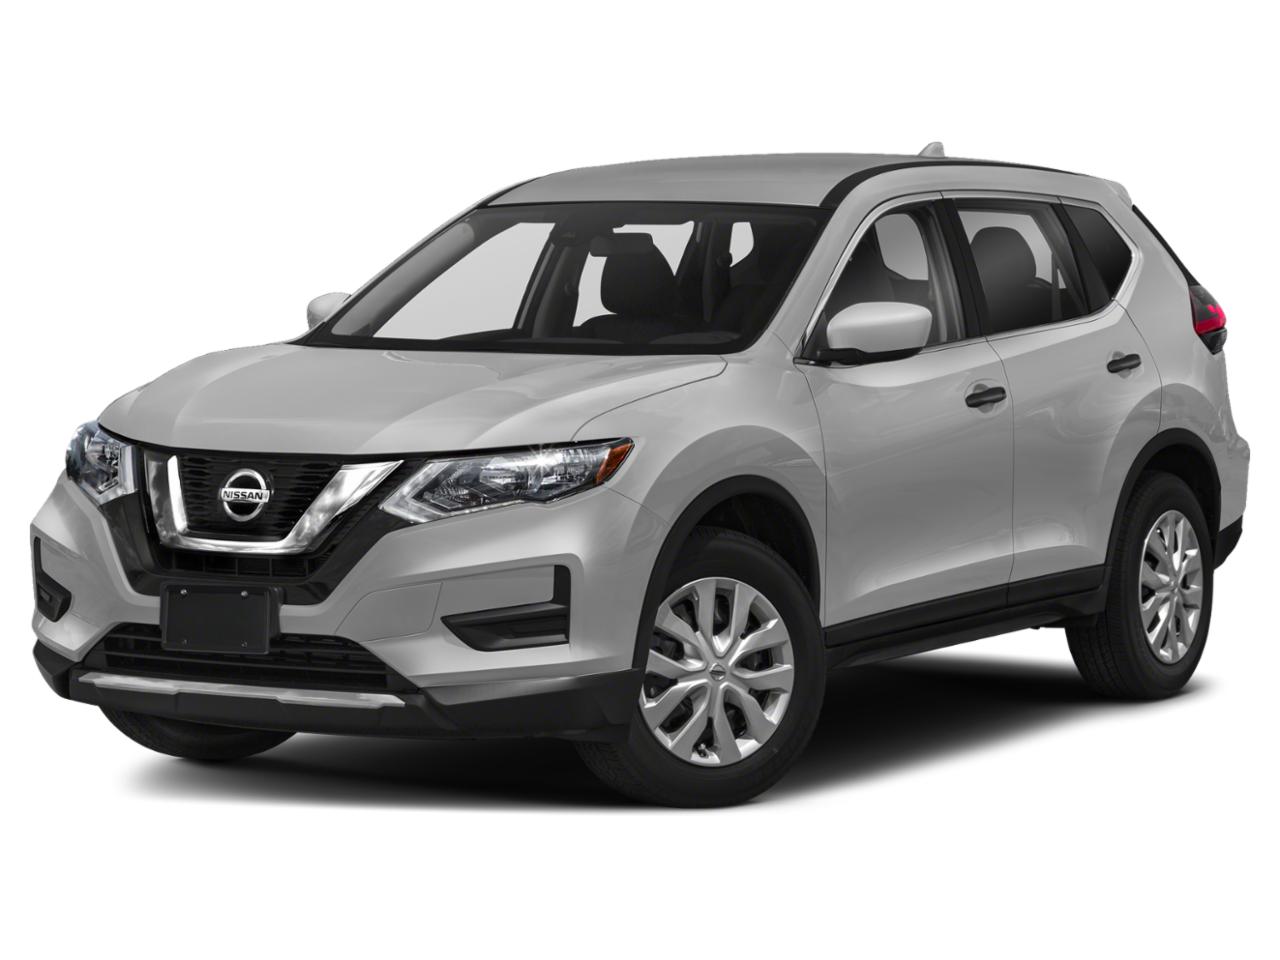 2020 Nissan Rogue Vehicle Photo in Denison, TX 75020